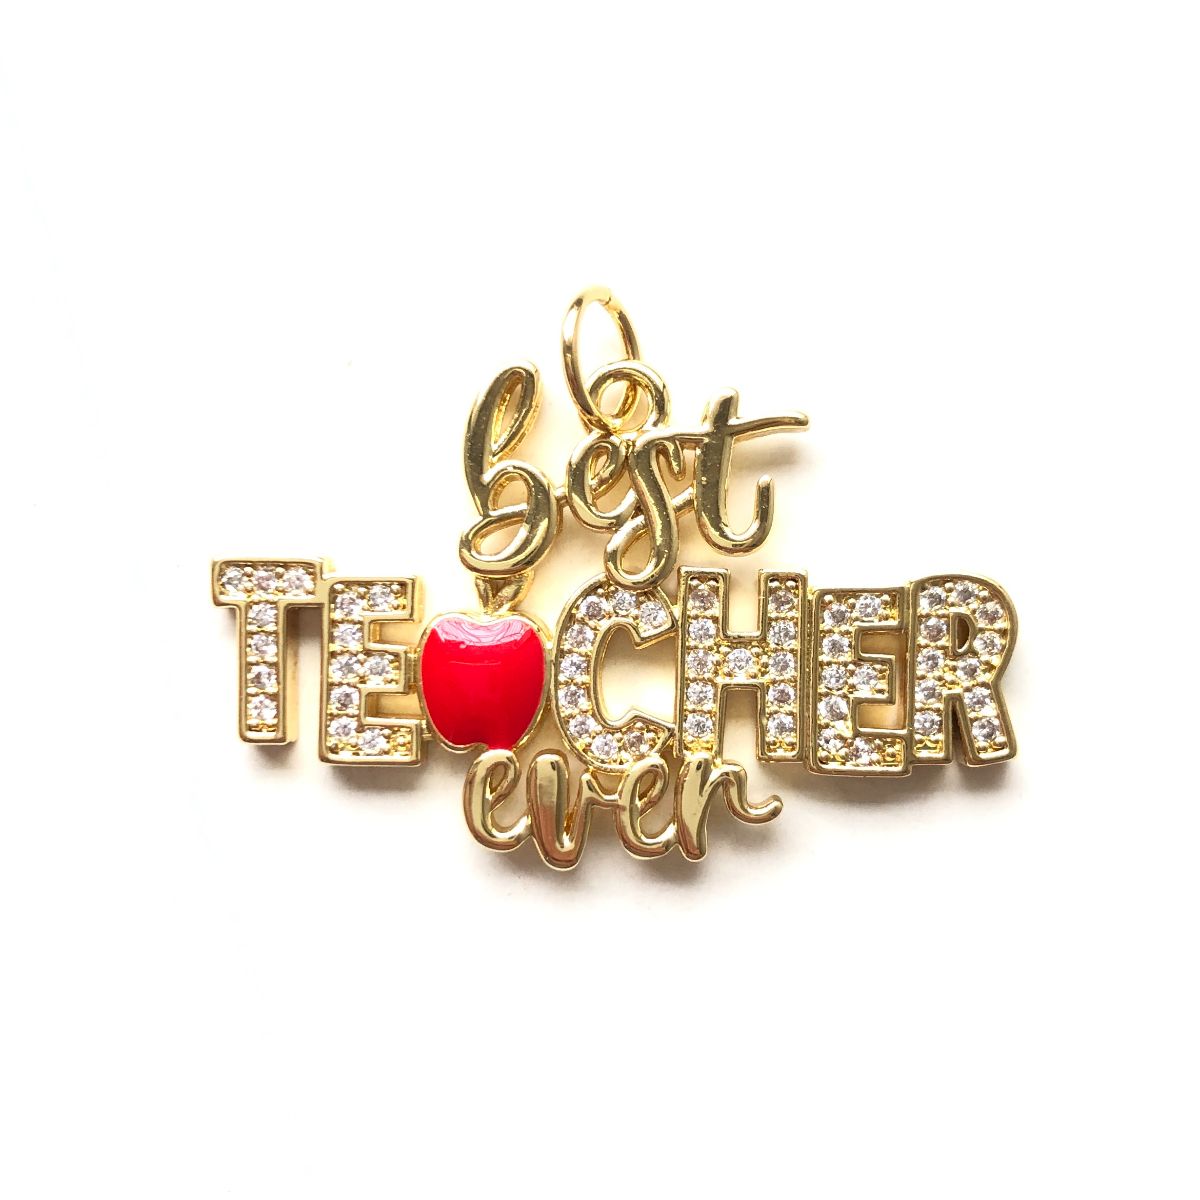 10pcs/lot 33.6*19.5mm CZ Paved Best Teacher Ever Word Charms for Graduation Teacher's Day Gold CZ Paved Charms Graduation New Charms Arrivals Words & Quotes Charms Beads Beyond